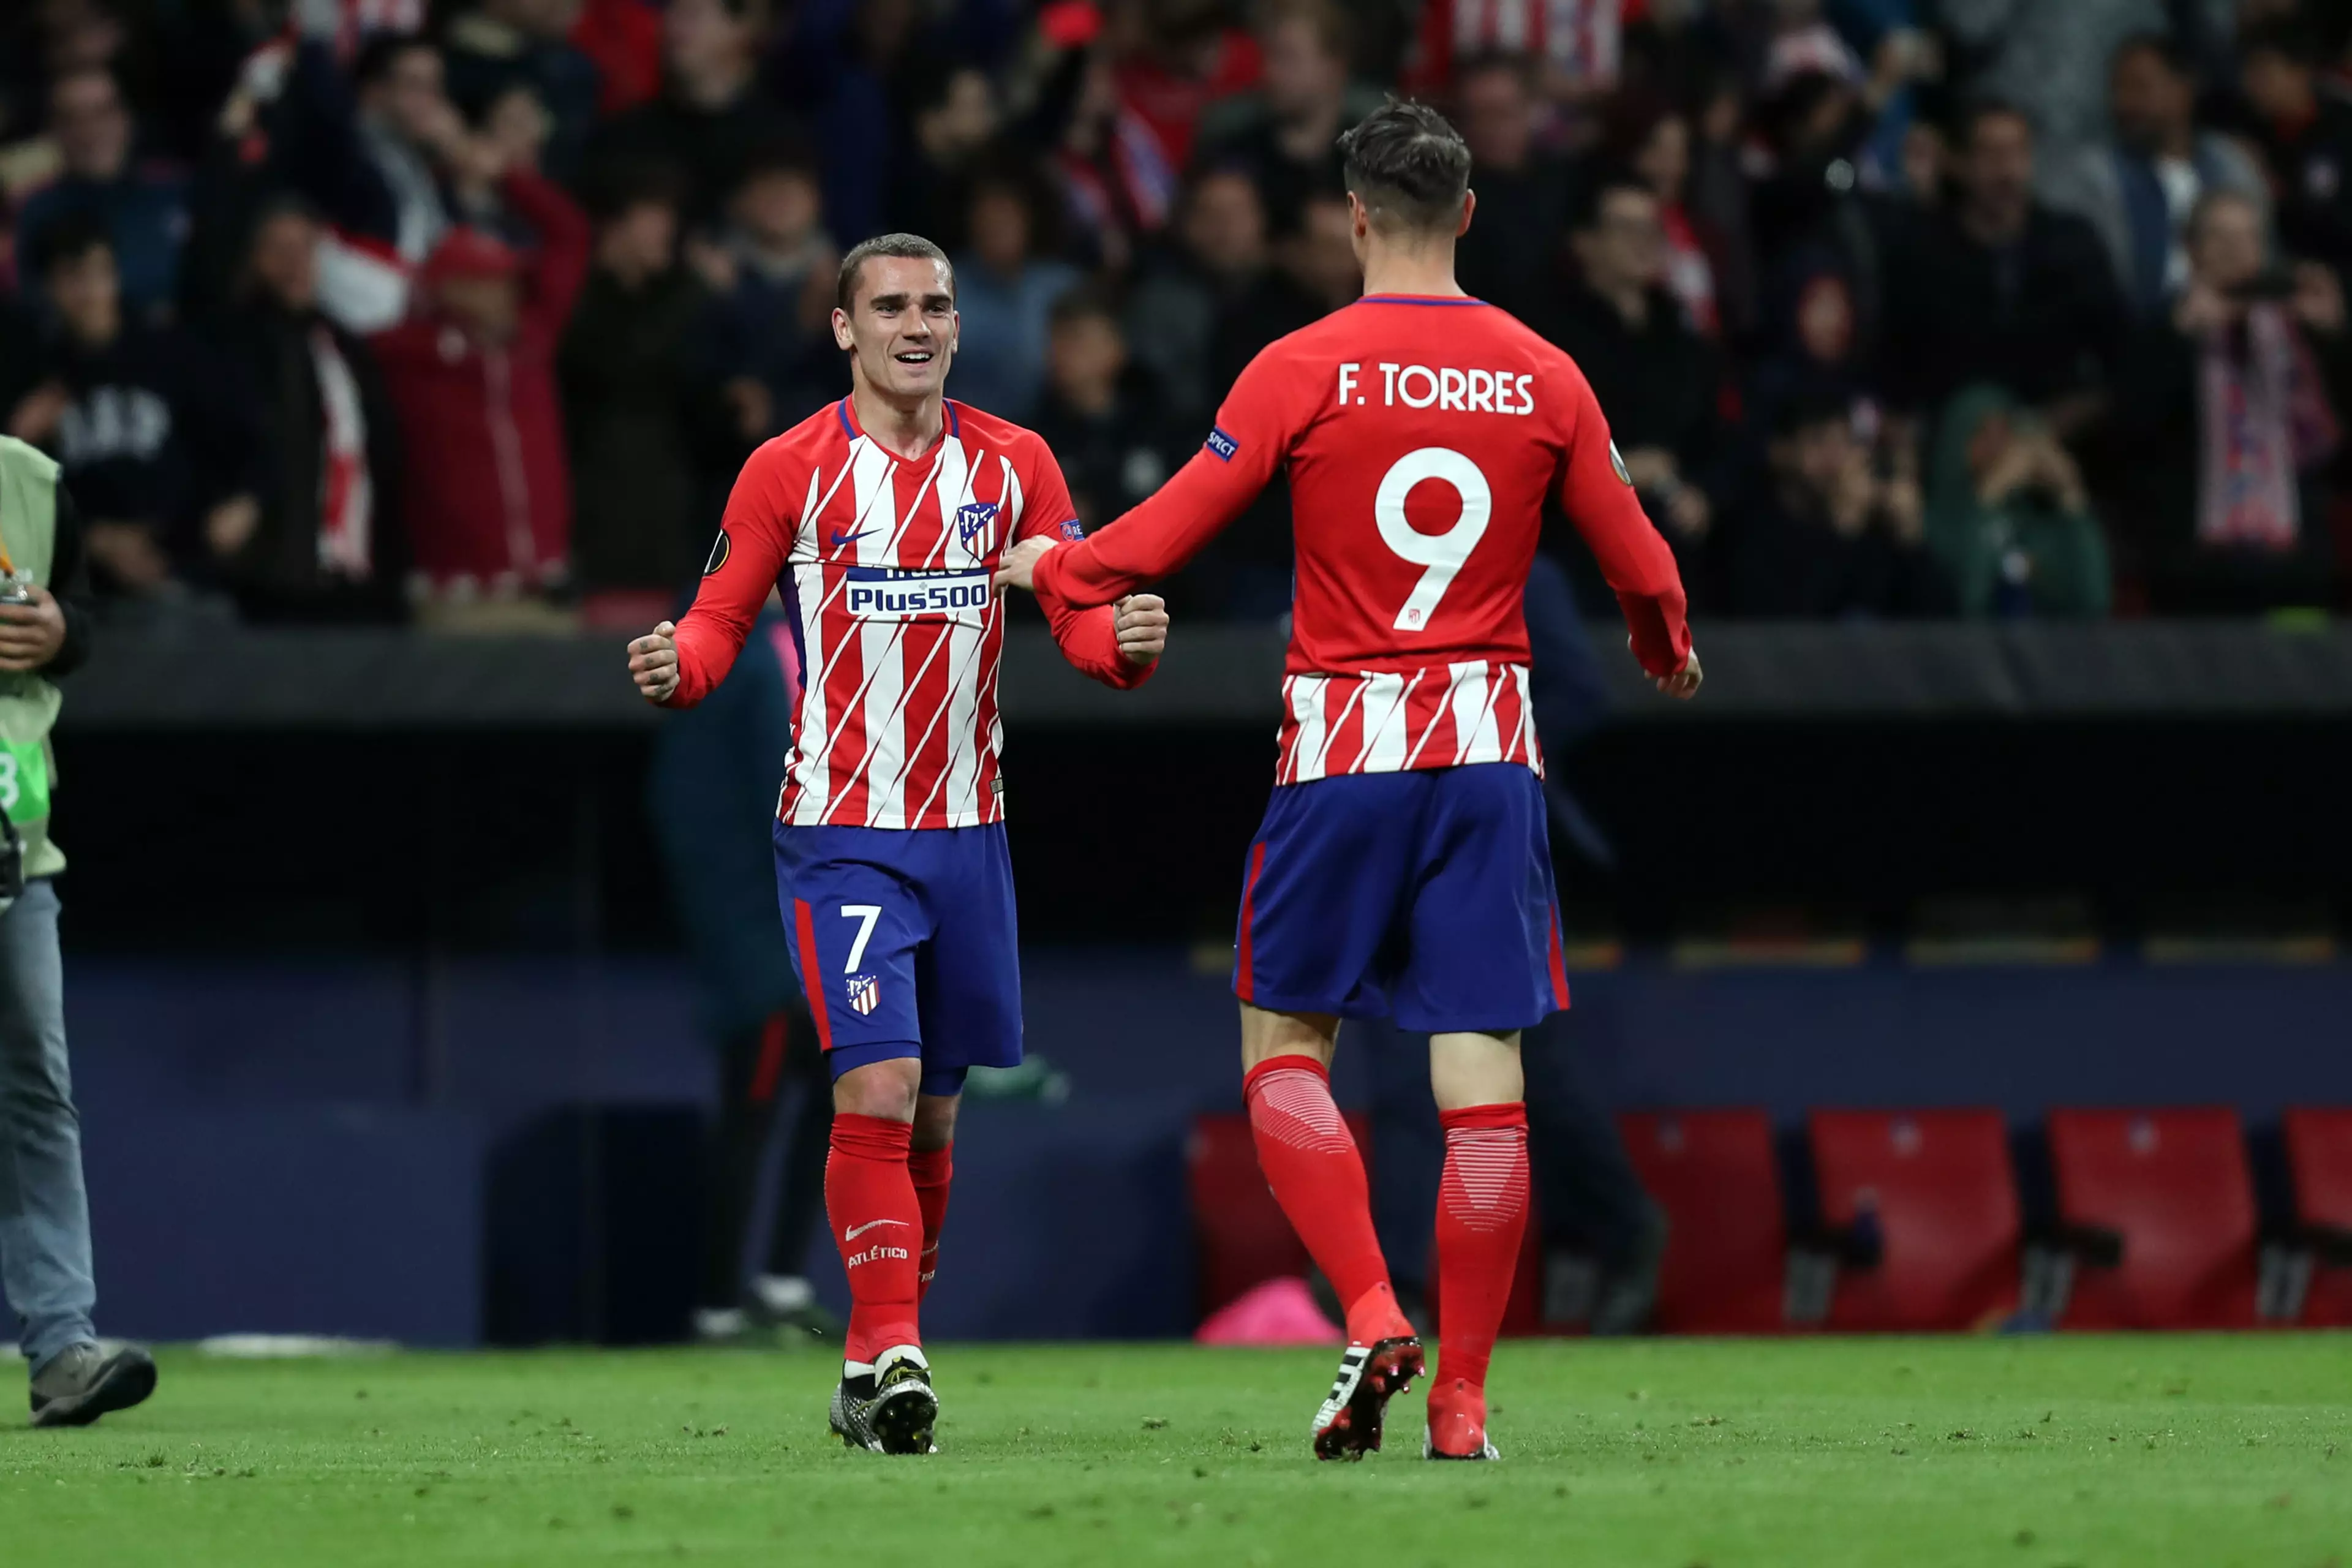 Griezmann and Torres celebrate. Image: PA